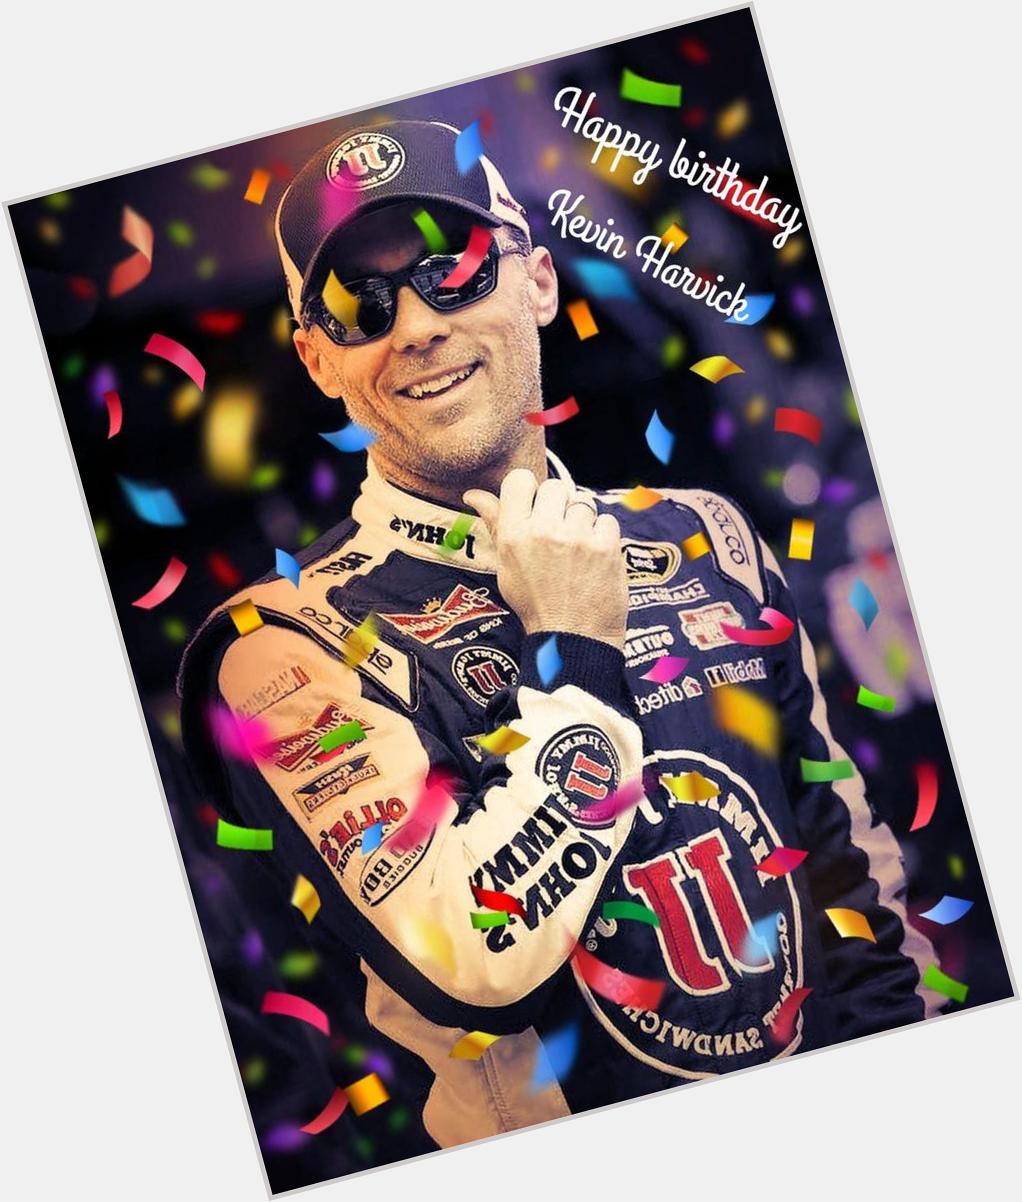 Happy birthday Kevin Harvick     have a wonderful day 